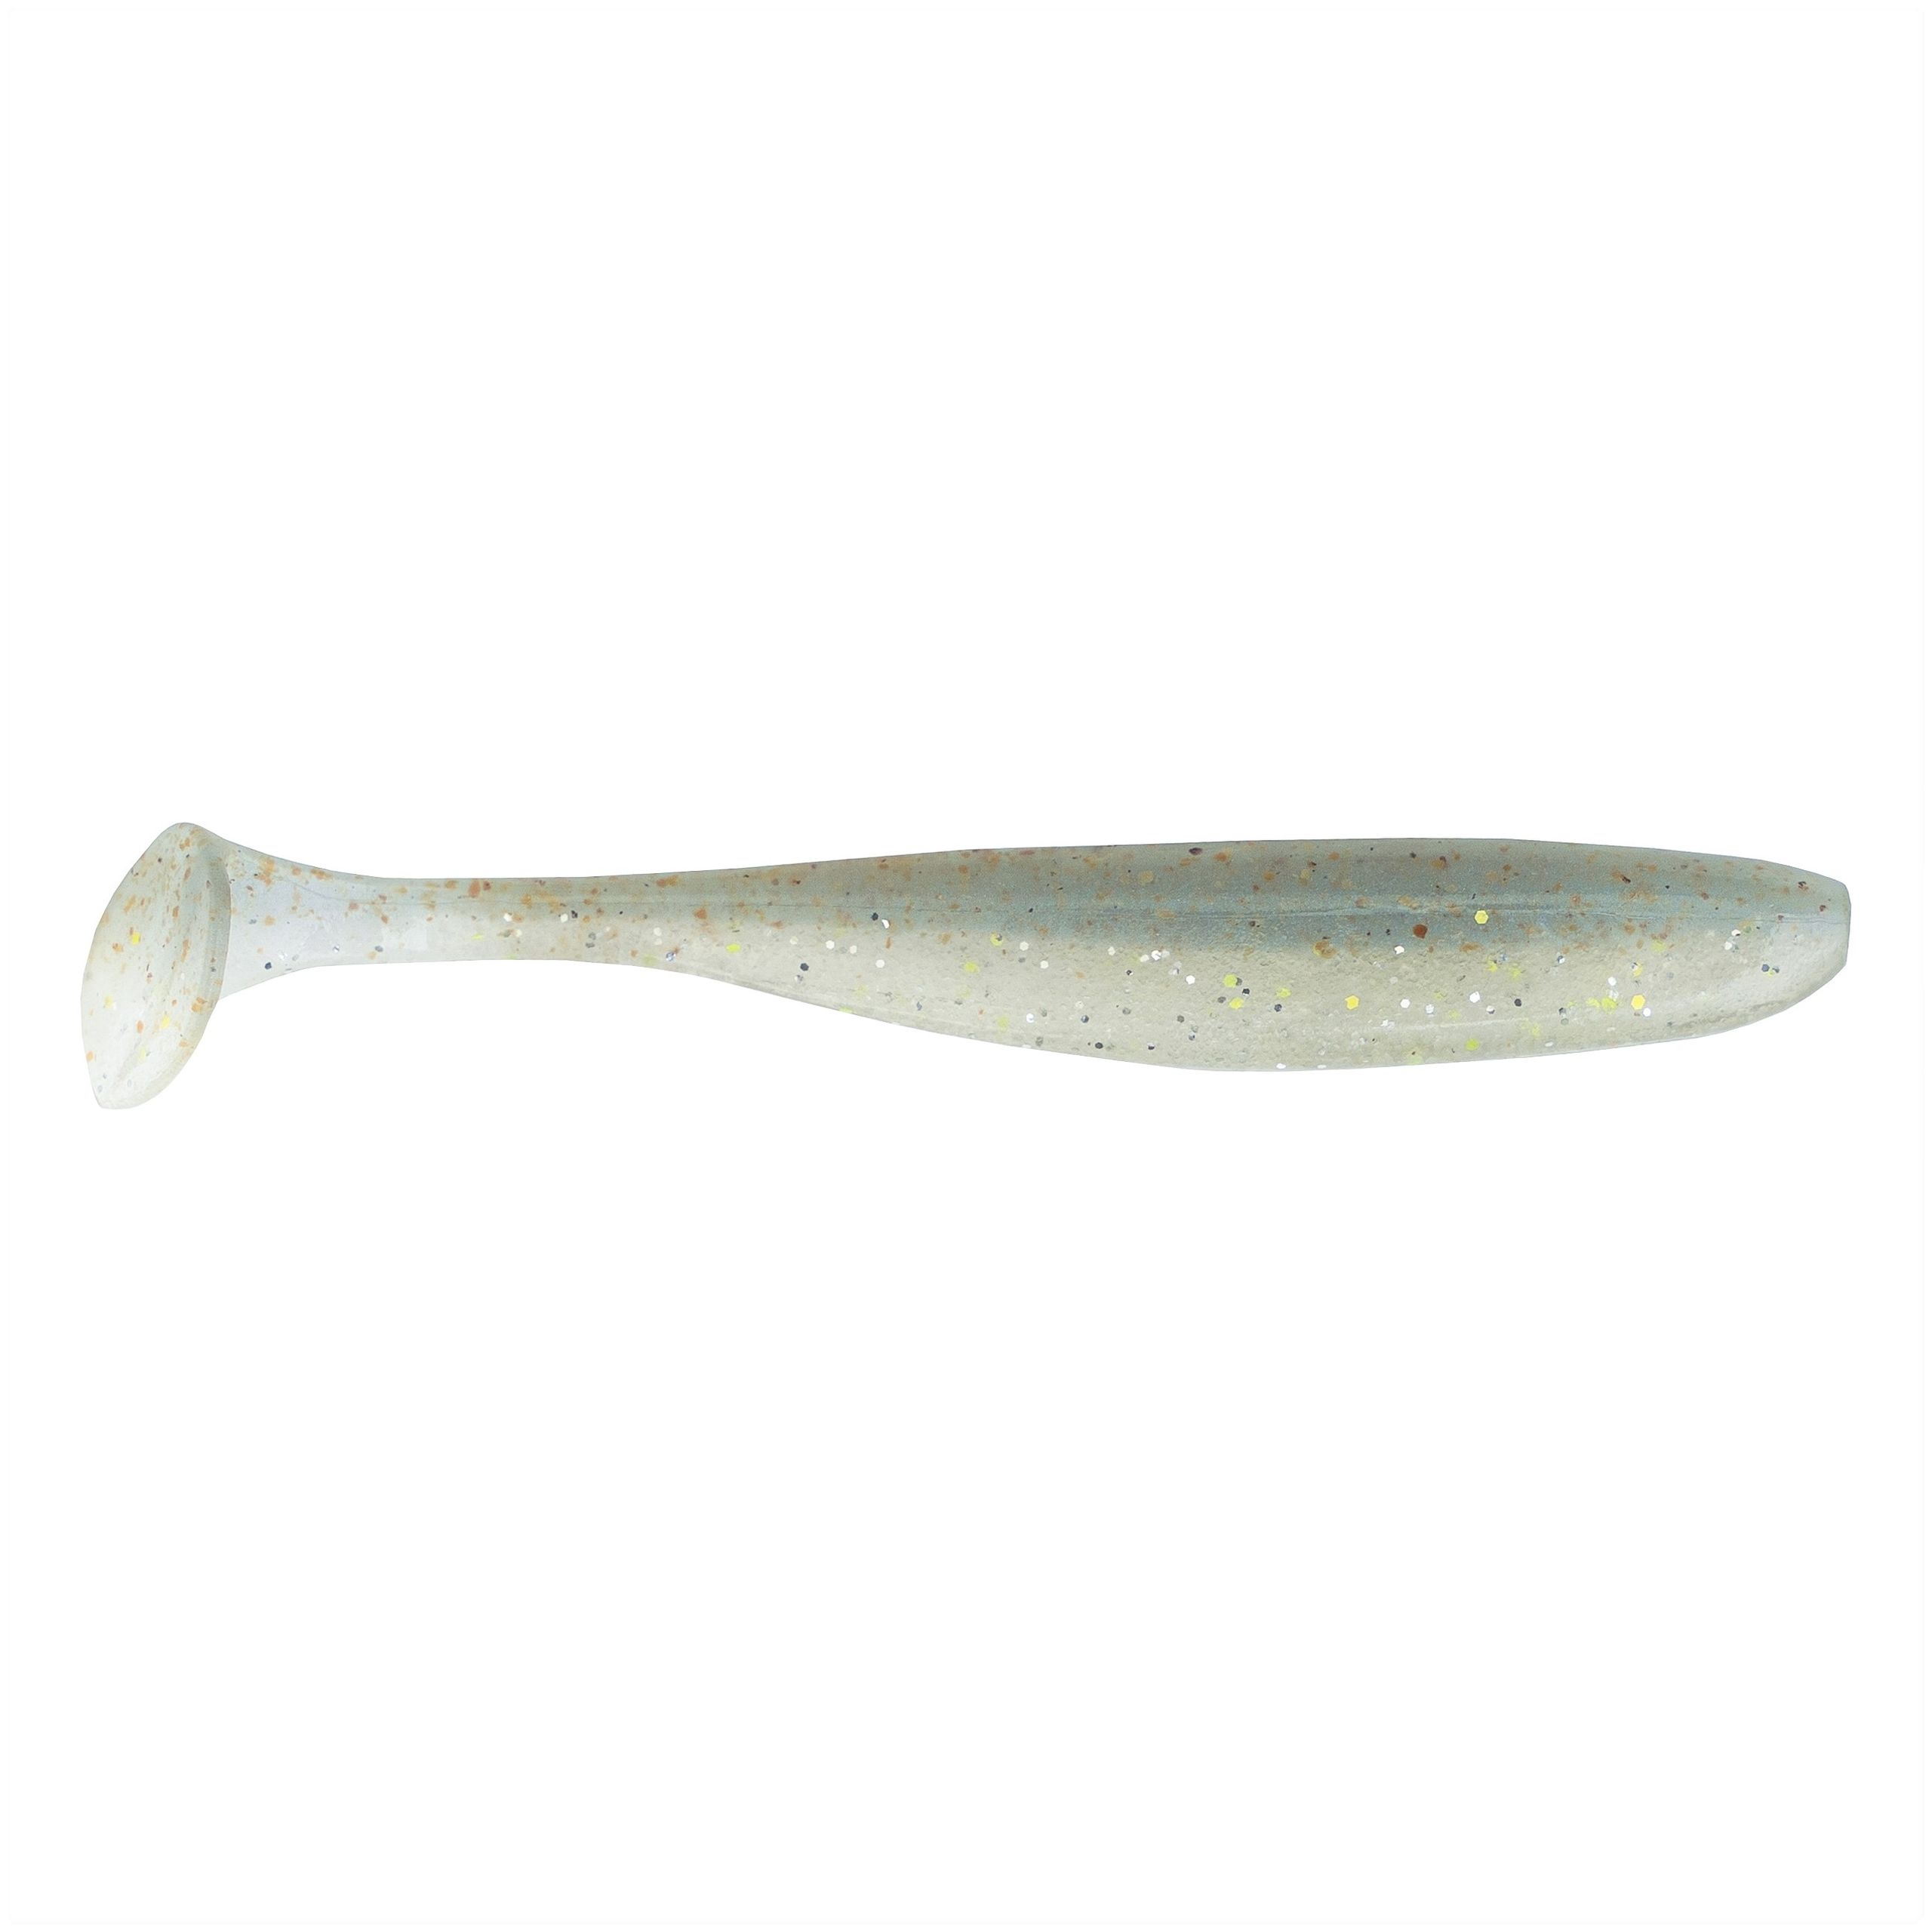  Keitech Easy Shiner 4-Inch Soft Paddletail Swimbait #400 Ayu :  Sports & Outdoors